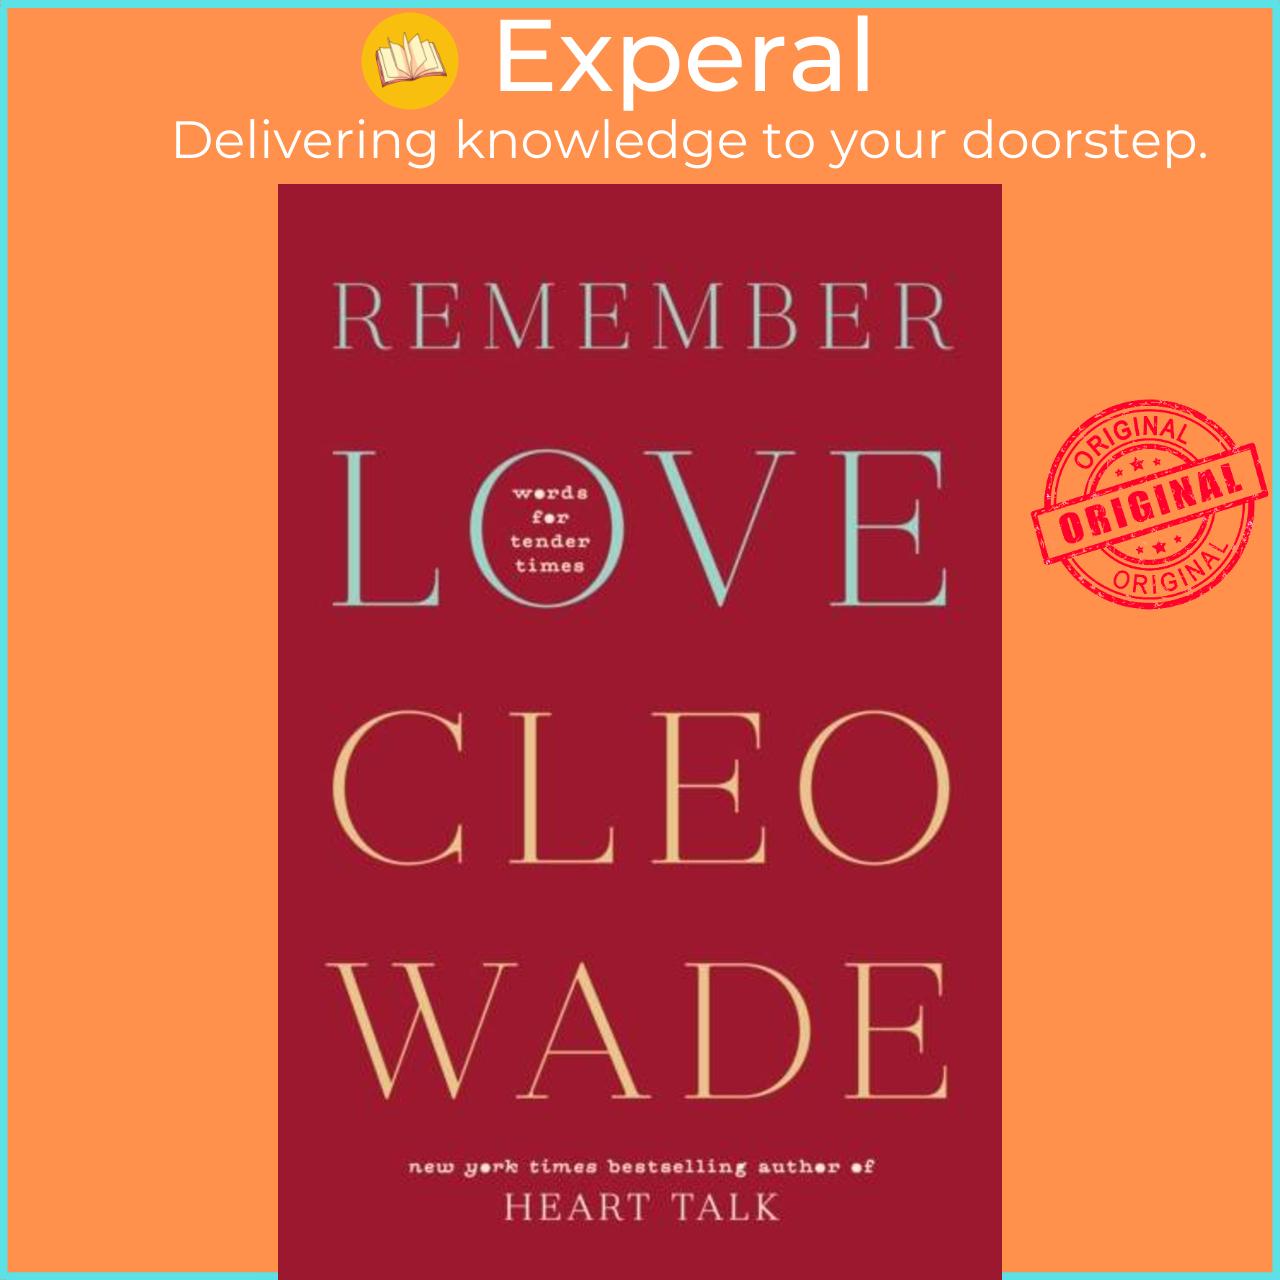 Sách - Remember Love - Words for Tender Times by Cleo Wade (UK edition, hardcover)